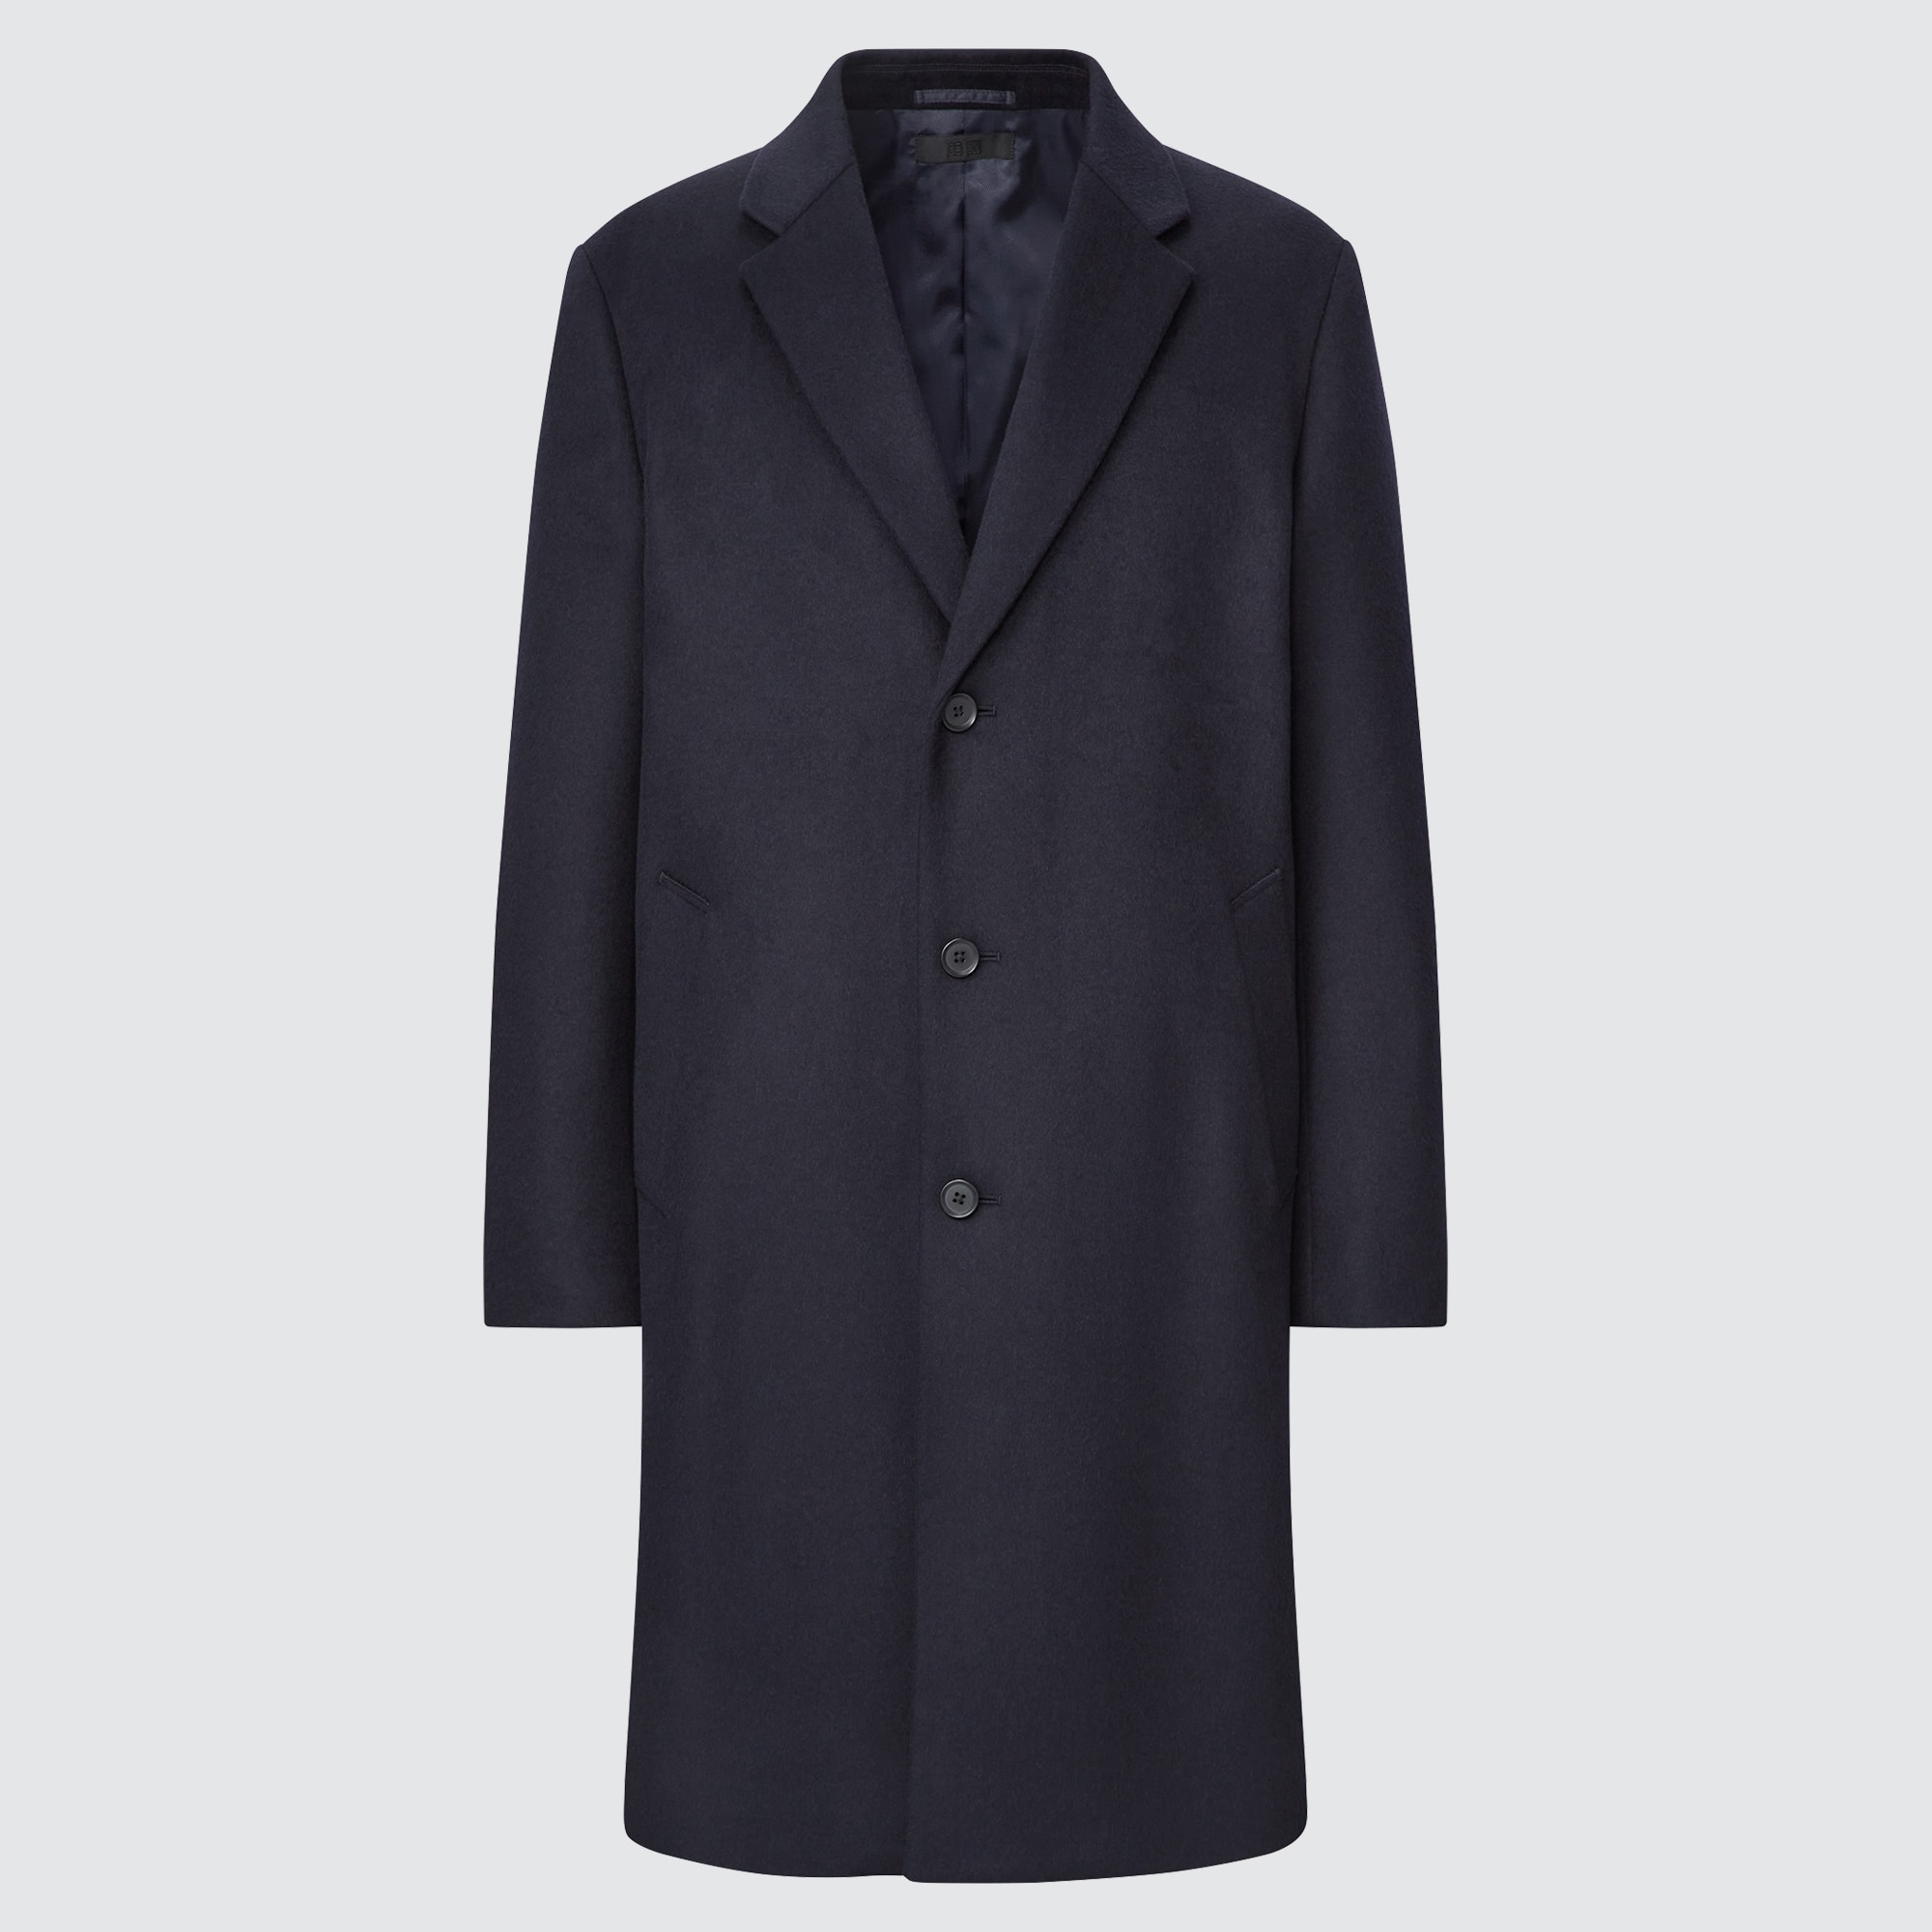 The SuperWarm WindBlocking Coat You Can Wear With a Suit